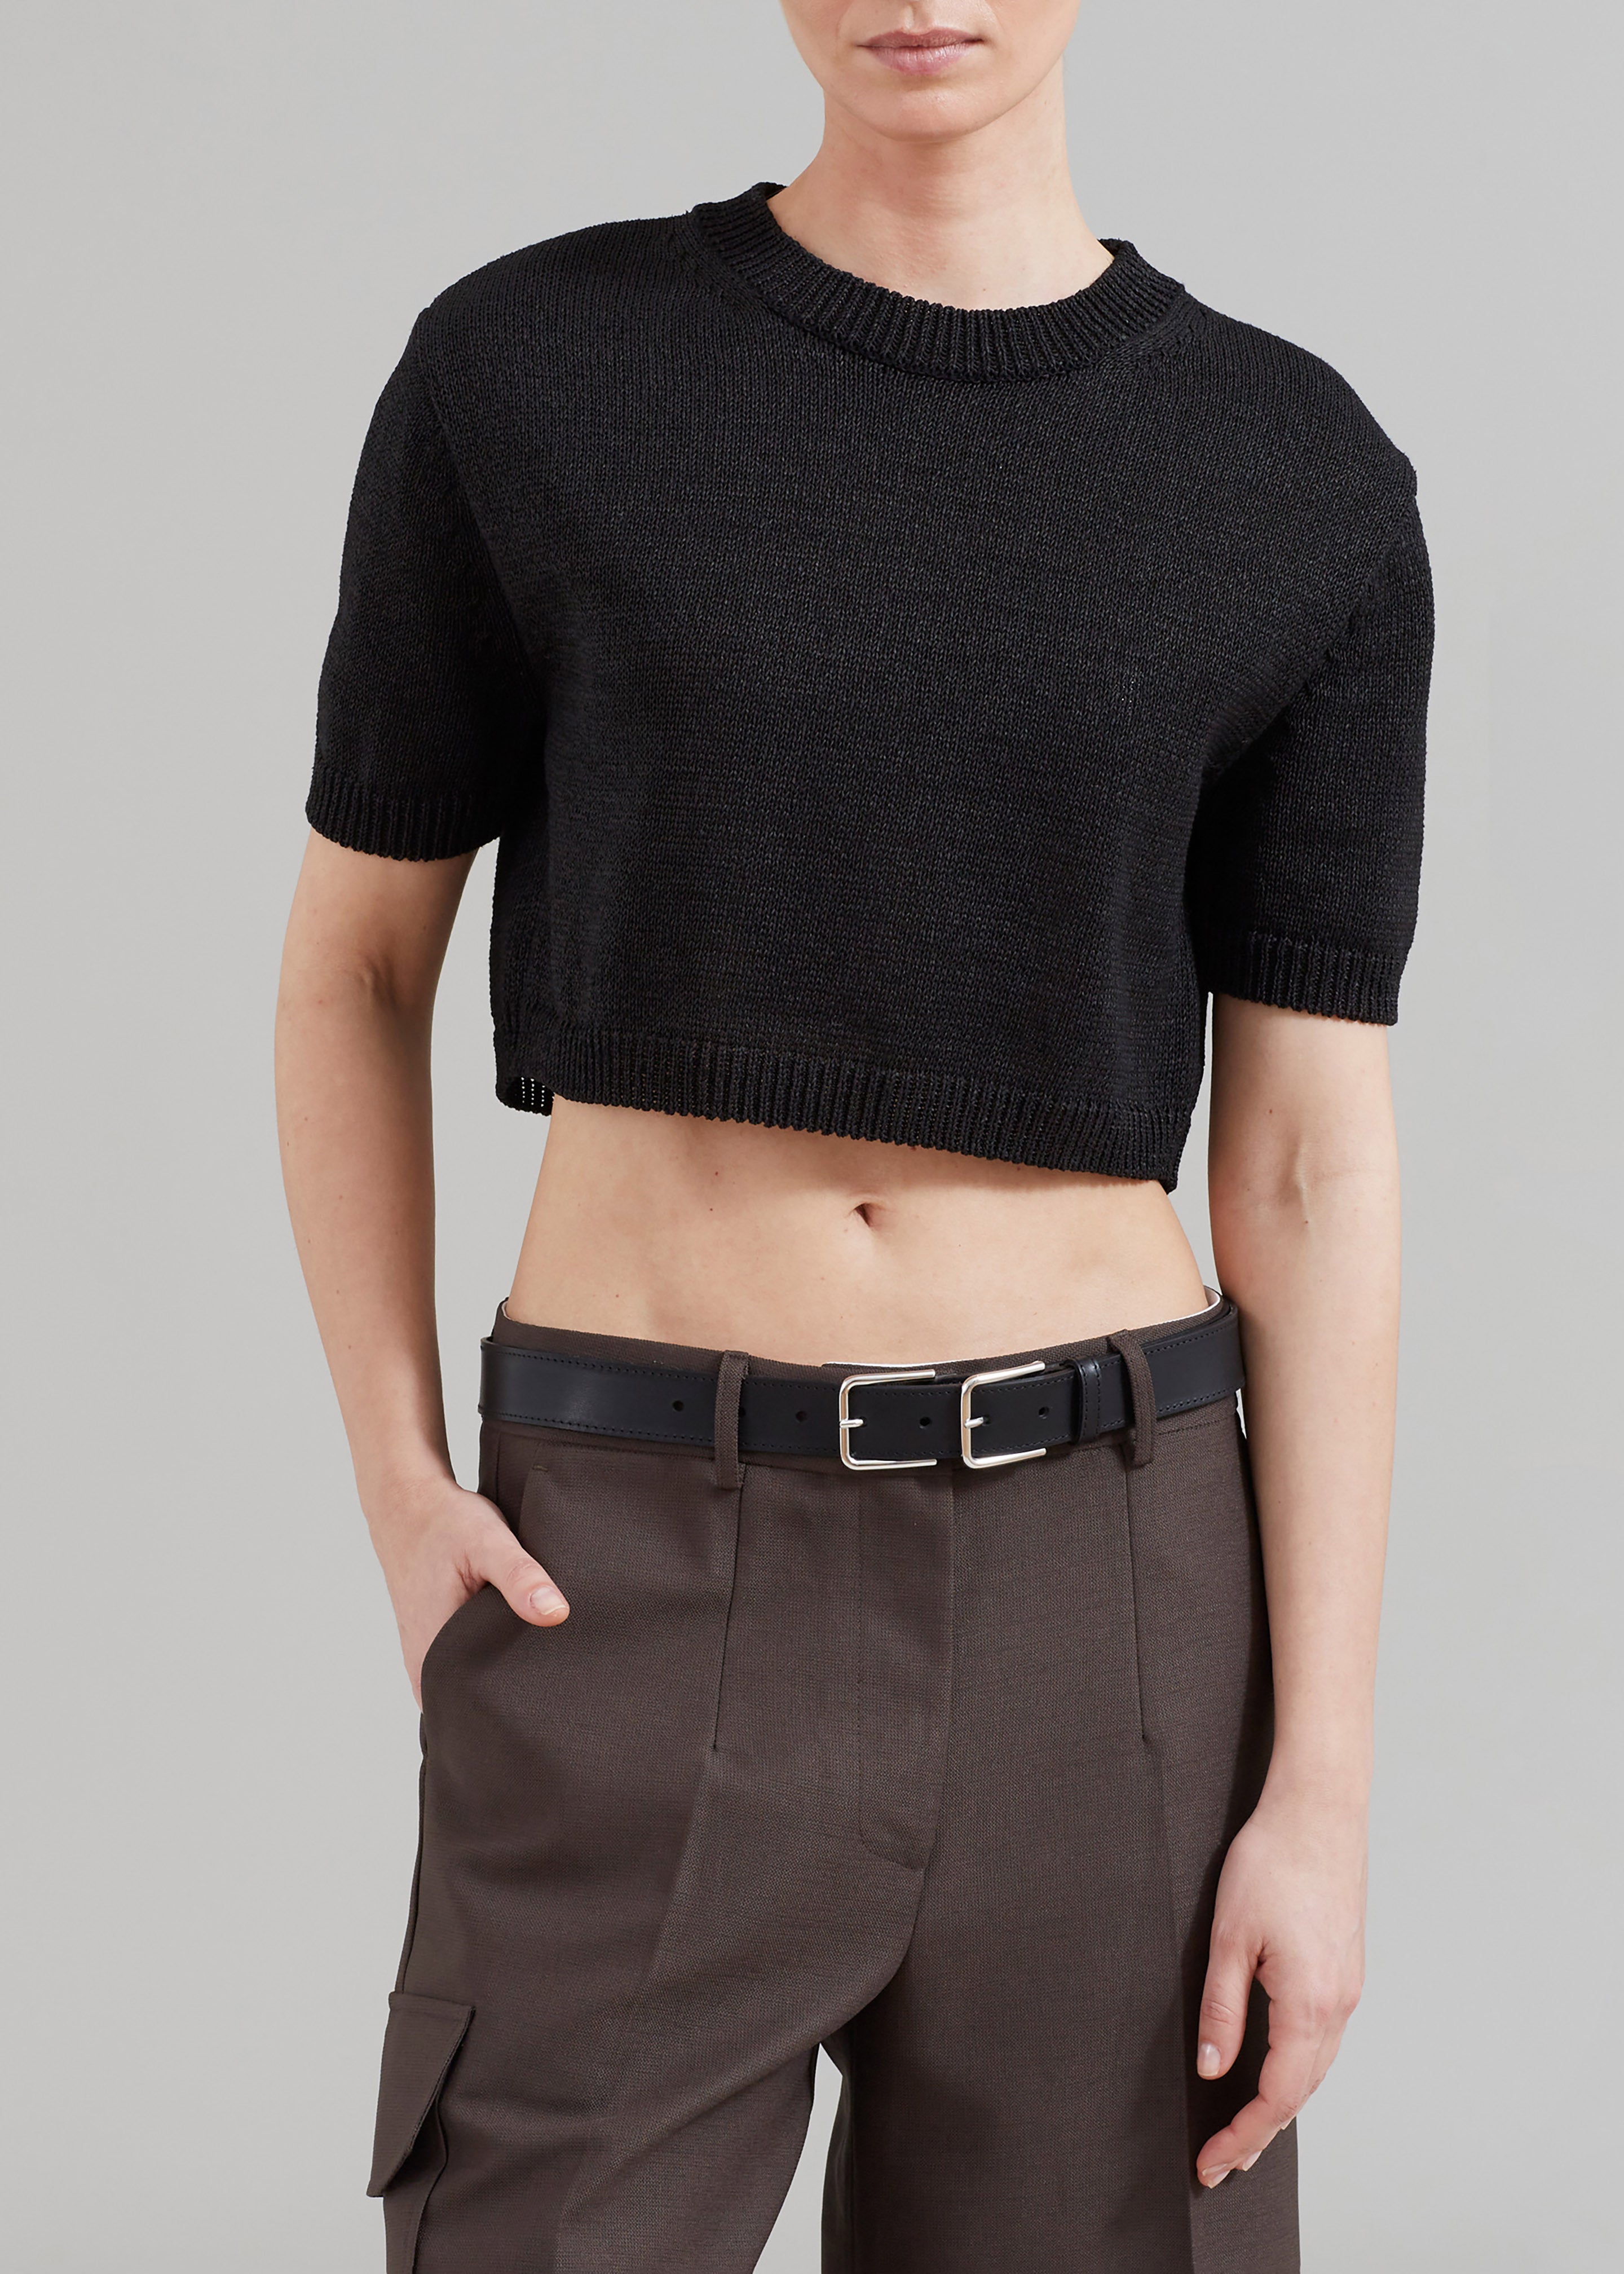 Holly Cropped Knit Top  - Black - 2